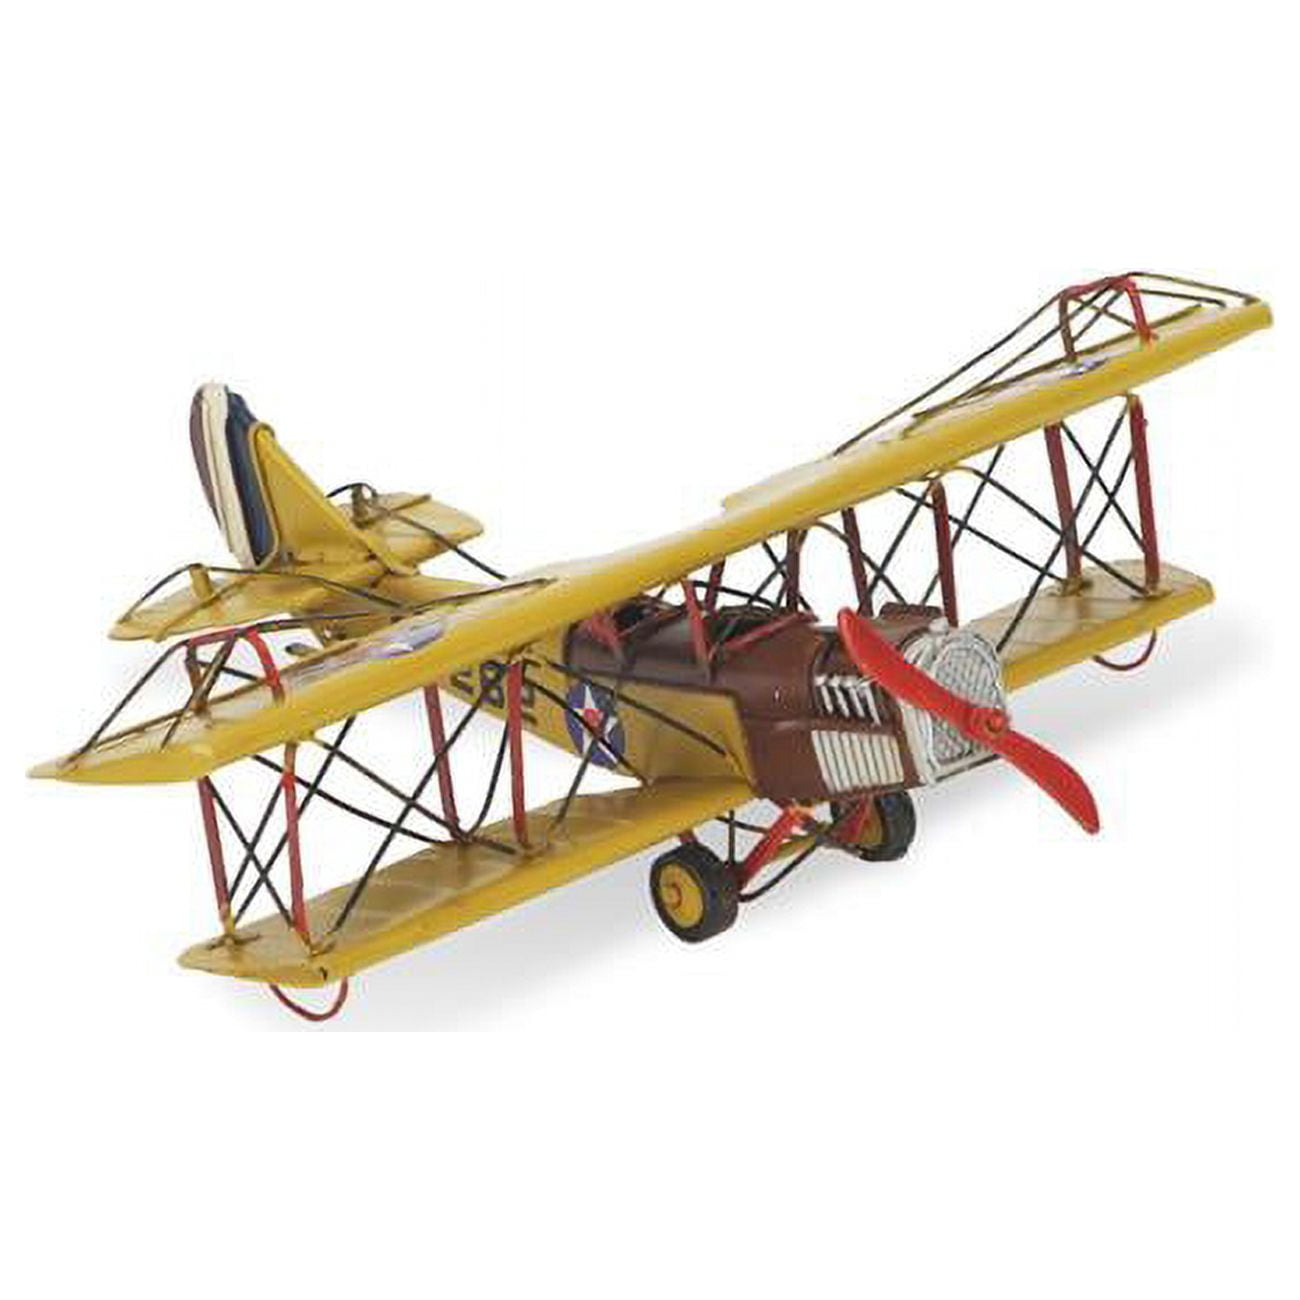 Picture of Cheungs JA-0130 Handcrafted 1918 Yellow Curtiss Jn-4 Combat Plane